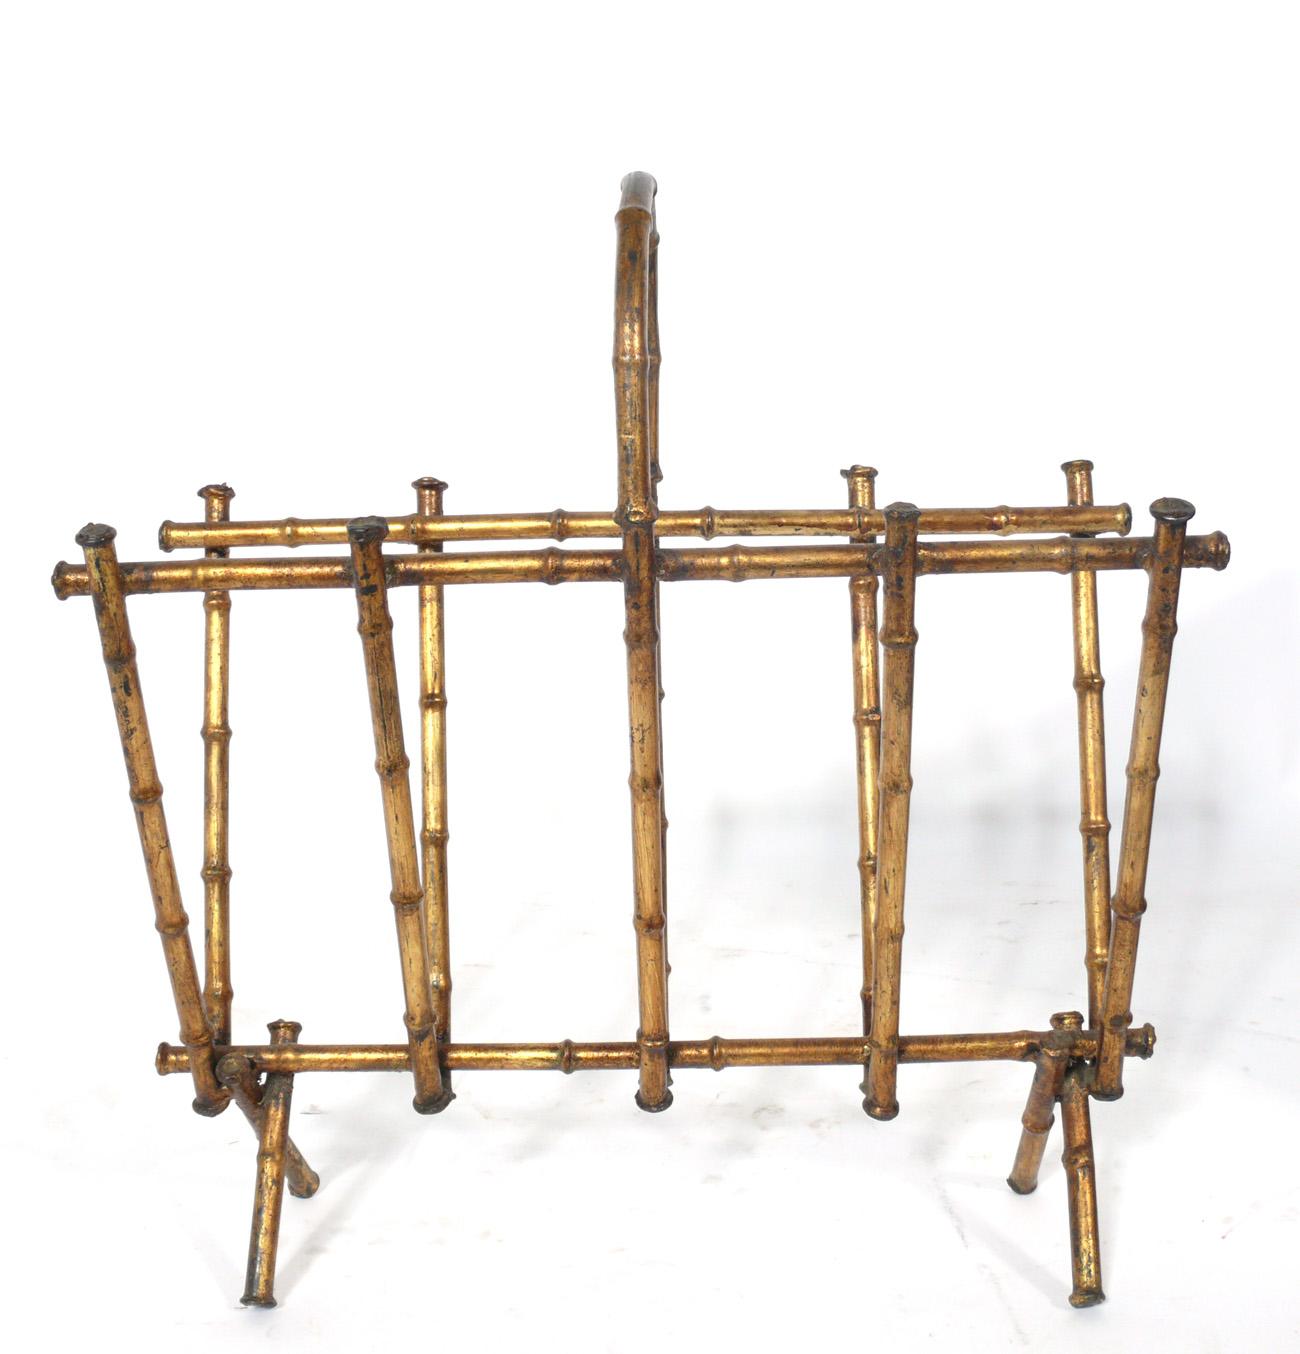 Selection of magazine racks or log holders, circa 19th century to 1950s. They are:
1) Italian gilt metal faux bamboo magazine rack, circa 1950s, seen at the top left. It measures: 18.5